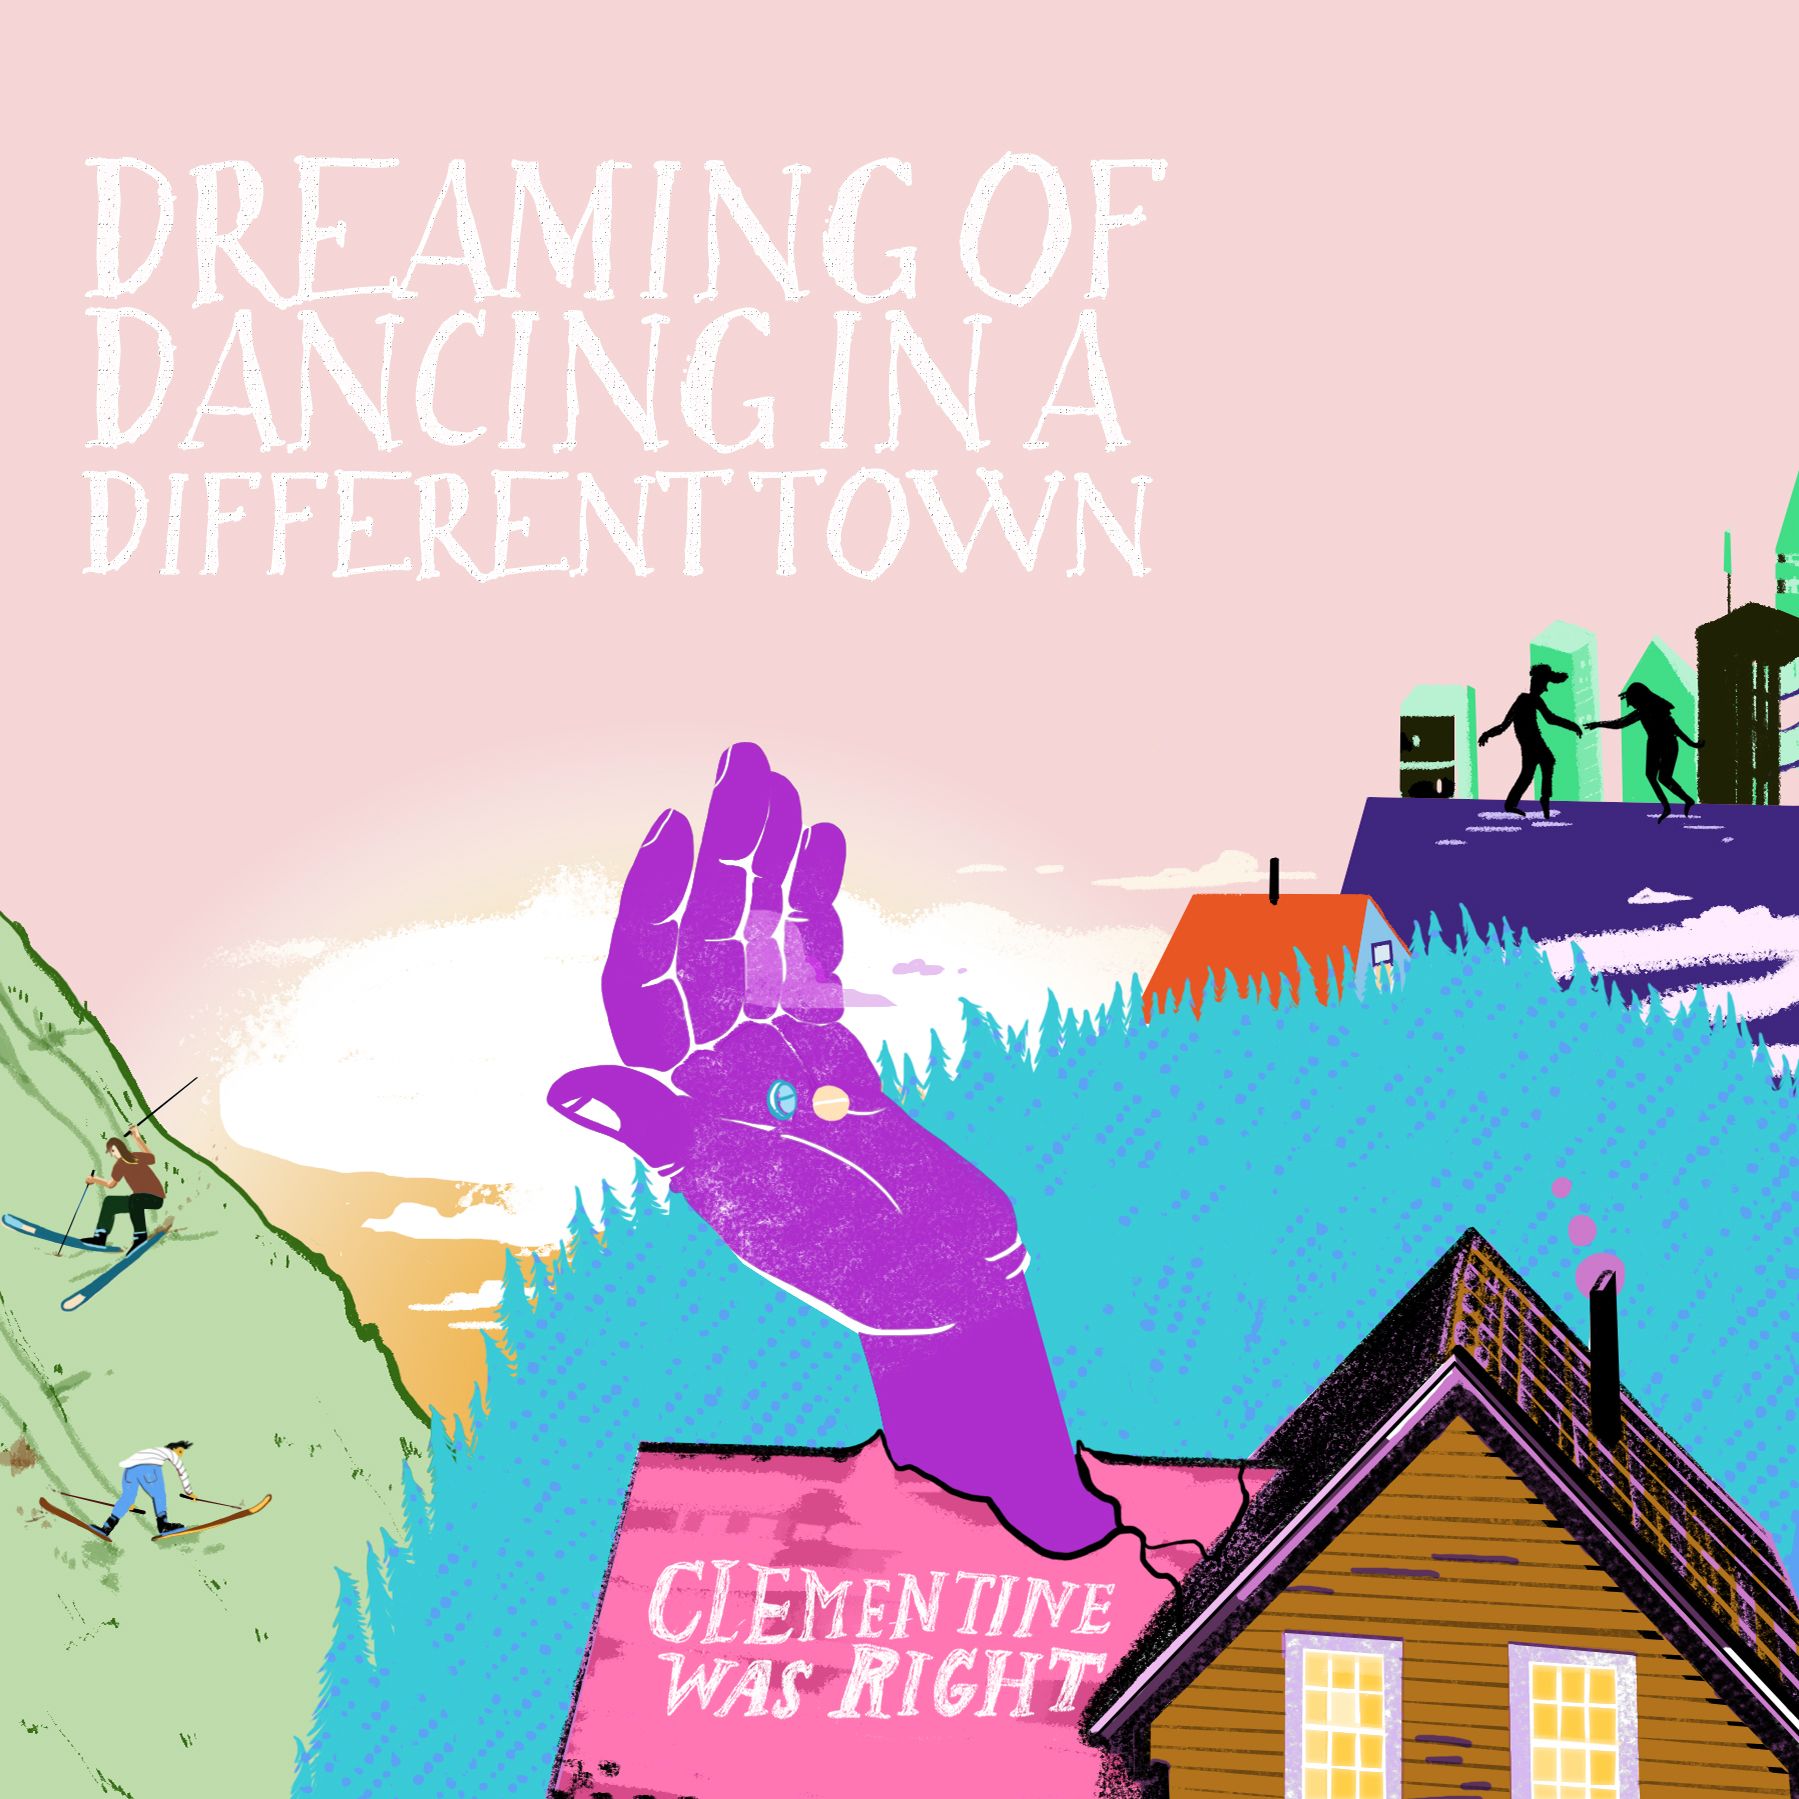 clementine was right dreaming of dancing in different towns